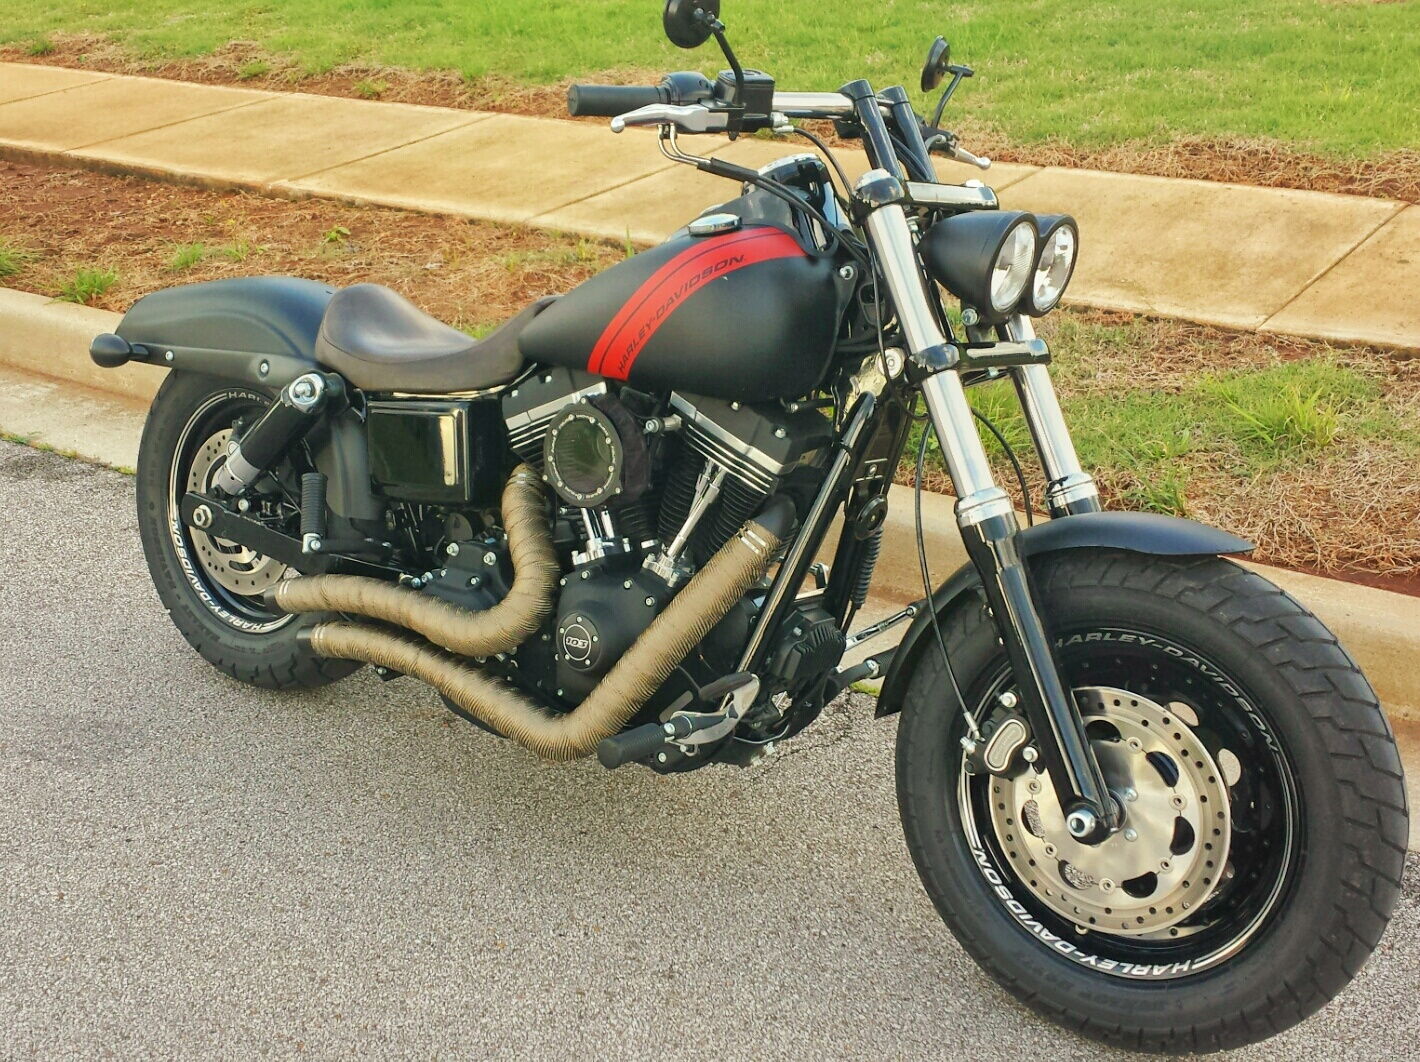 Exhaust Wrap issues - Harley Davidson Forums